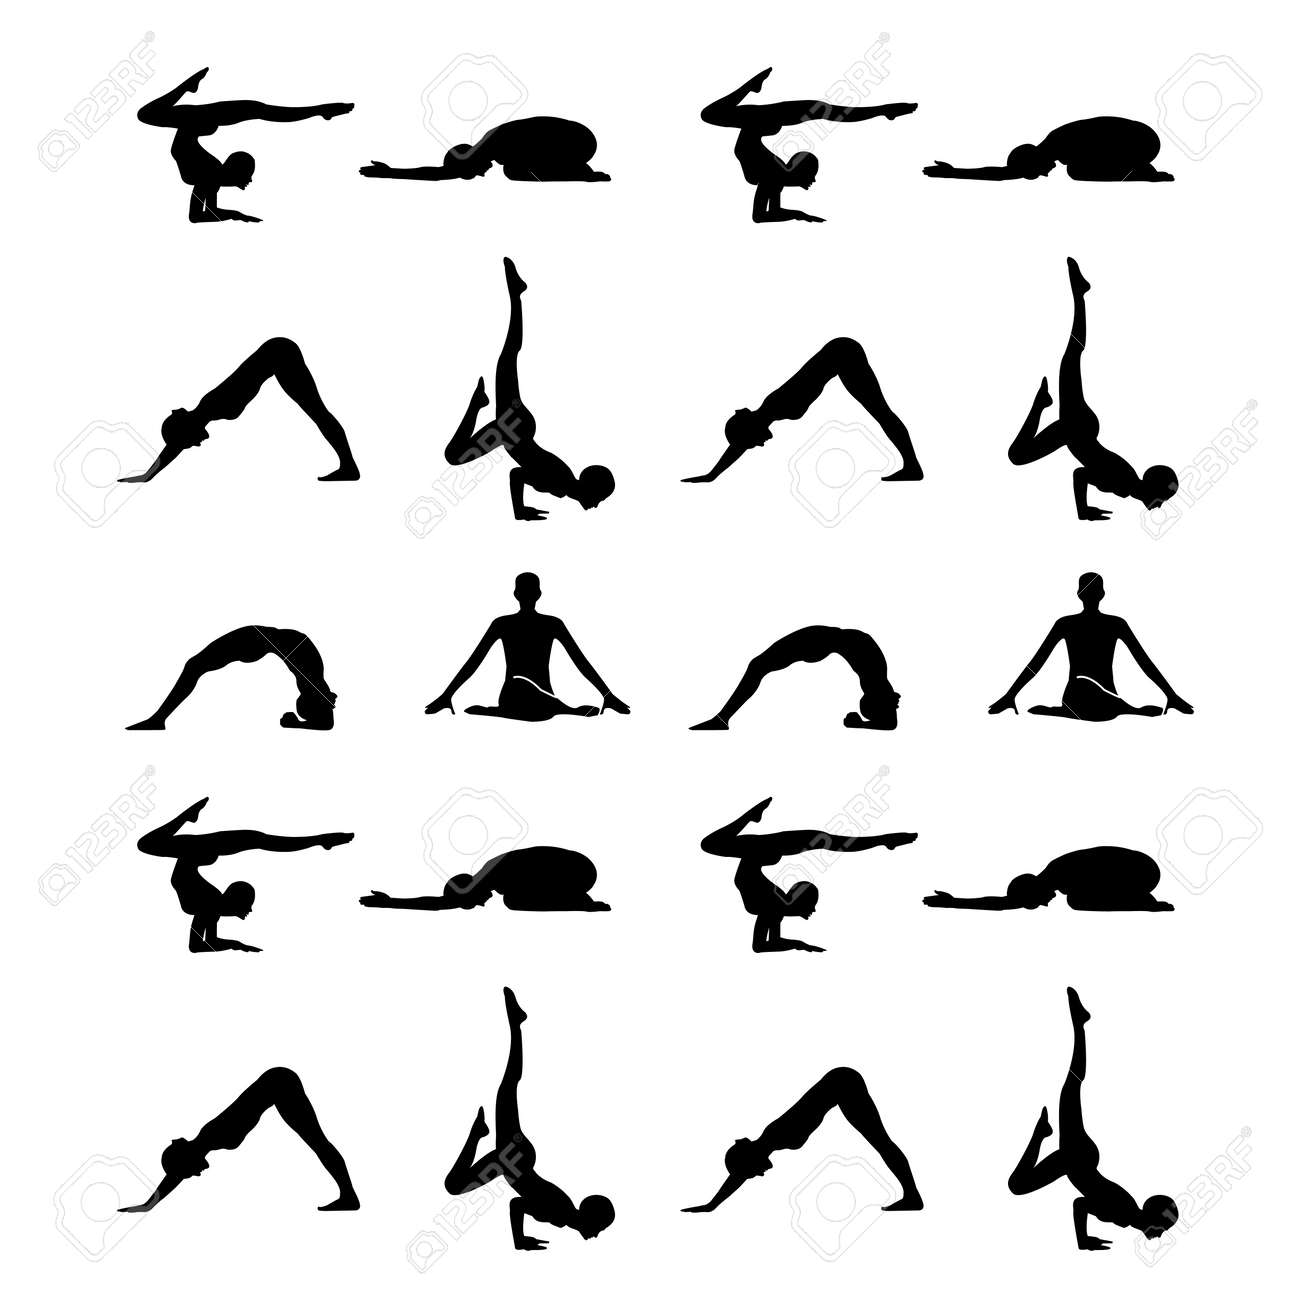 Yoga Poses Silhouette Wallpaper Royalty Free Cliparts Vectors